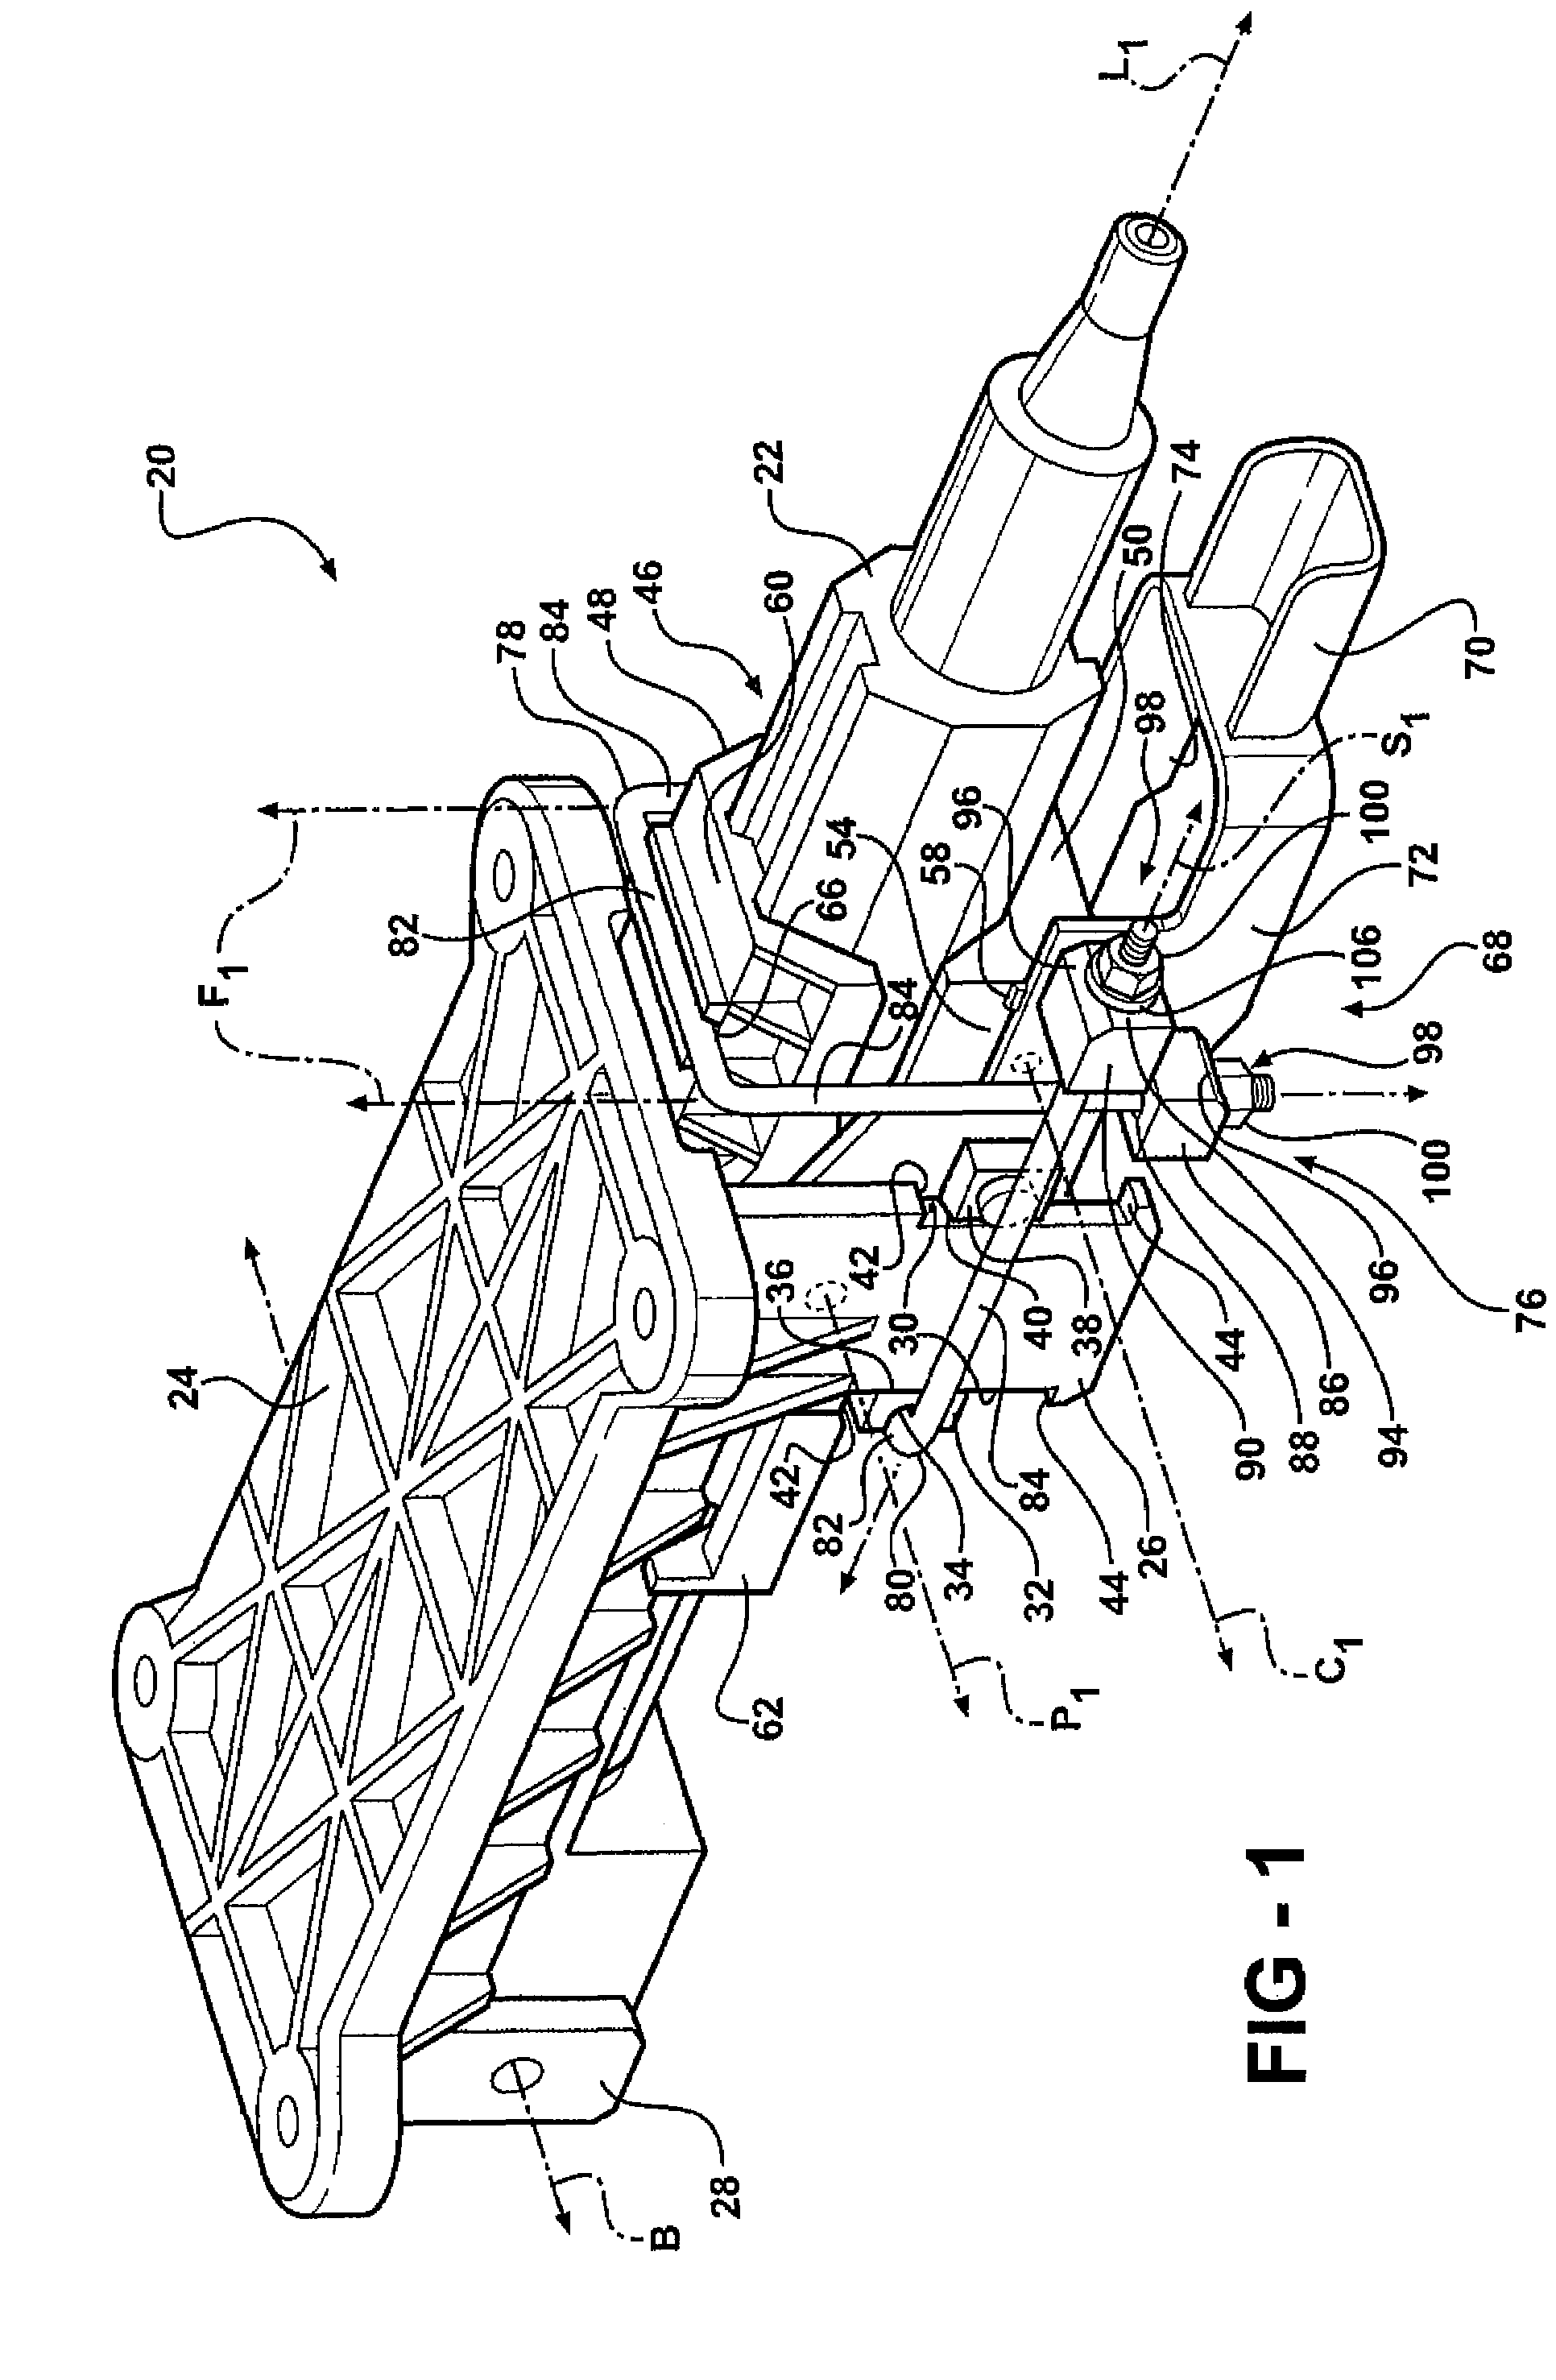 Adjustable steering column assembly for a vehicle